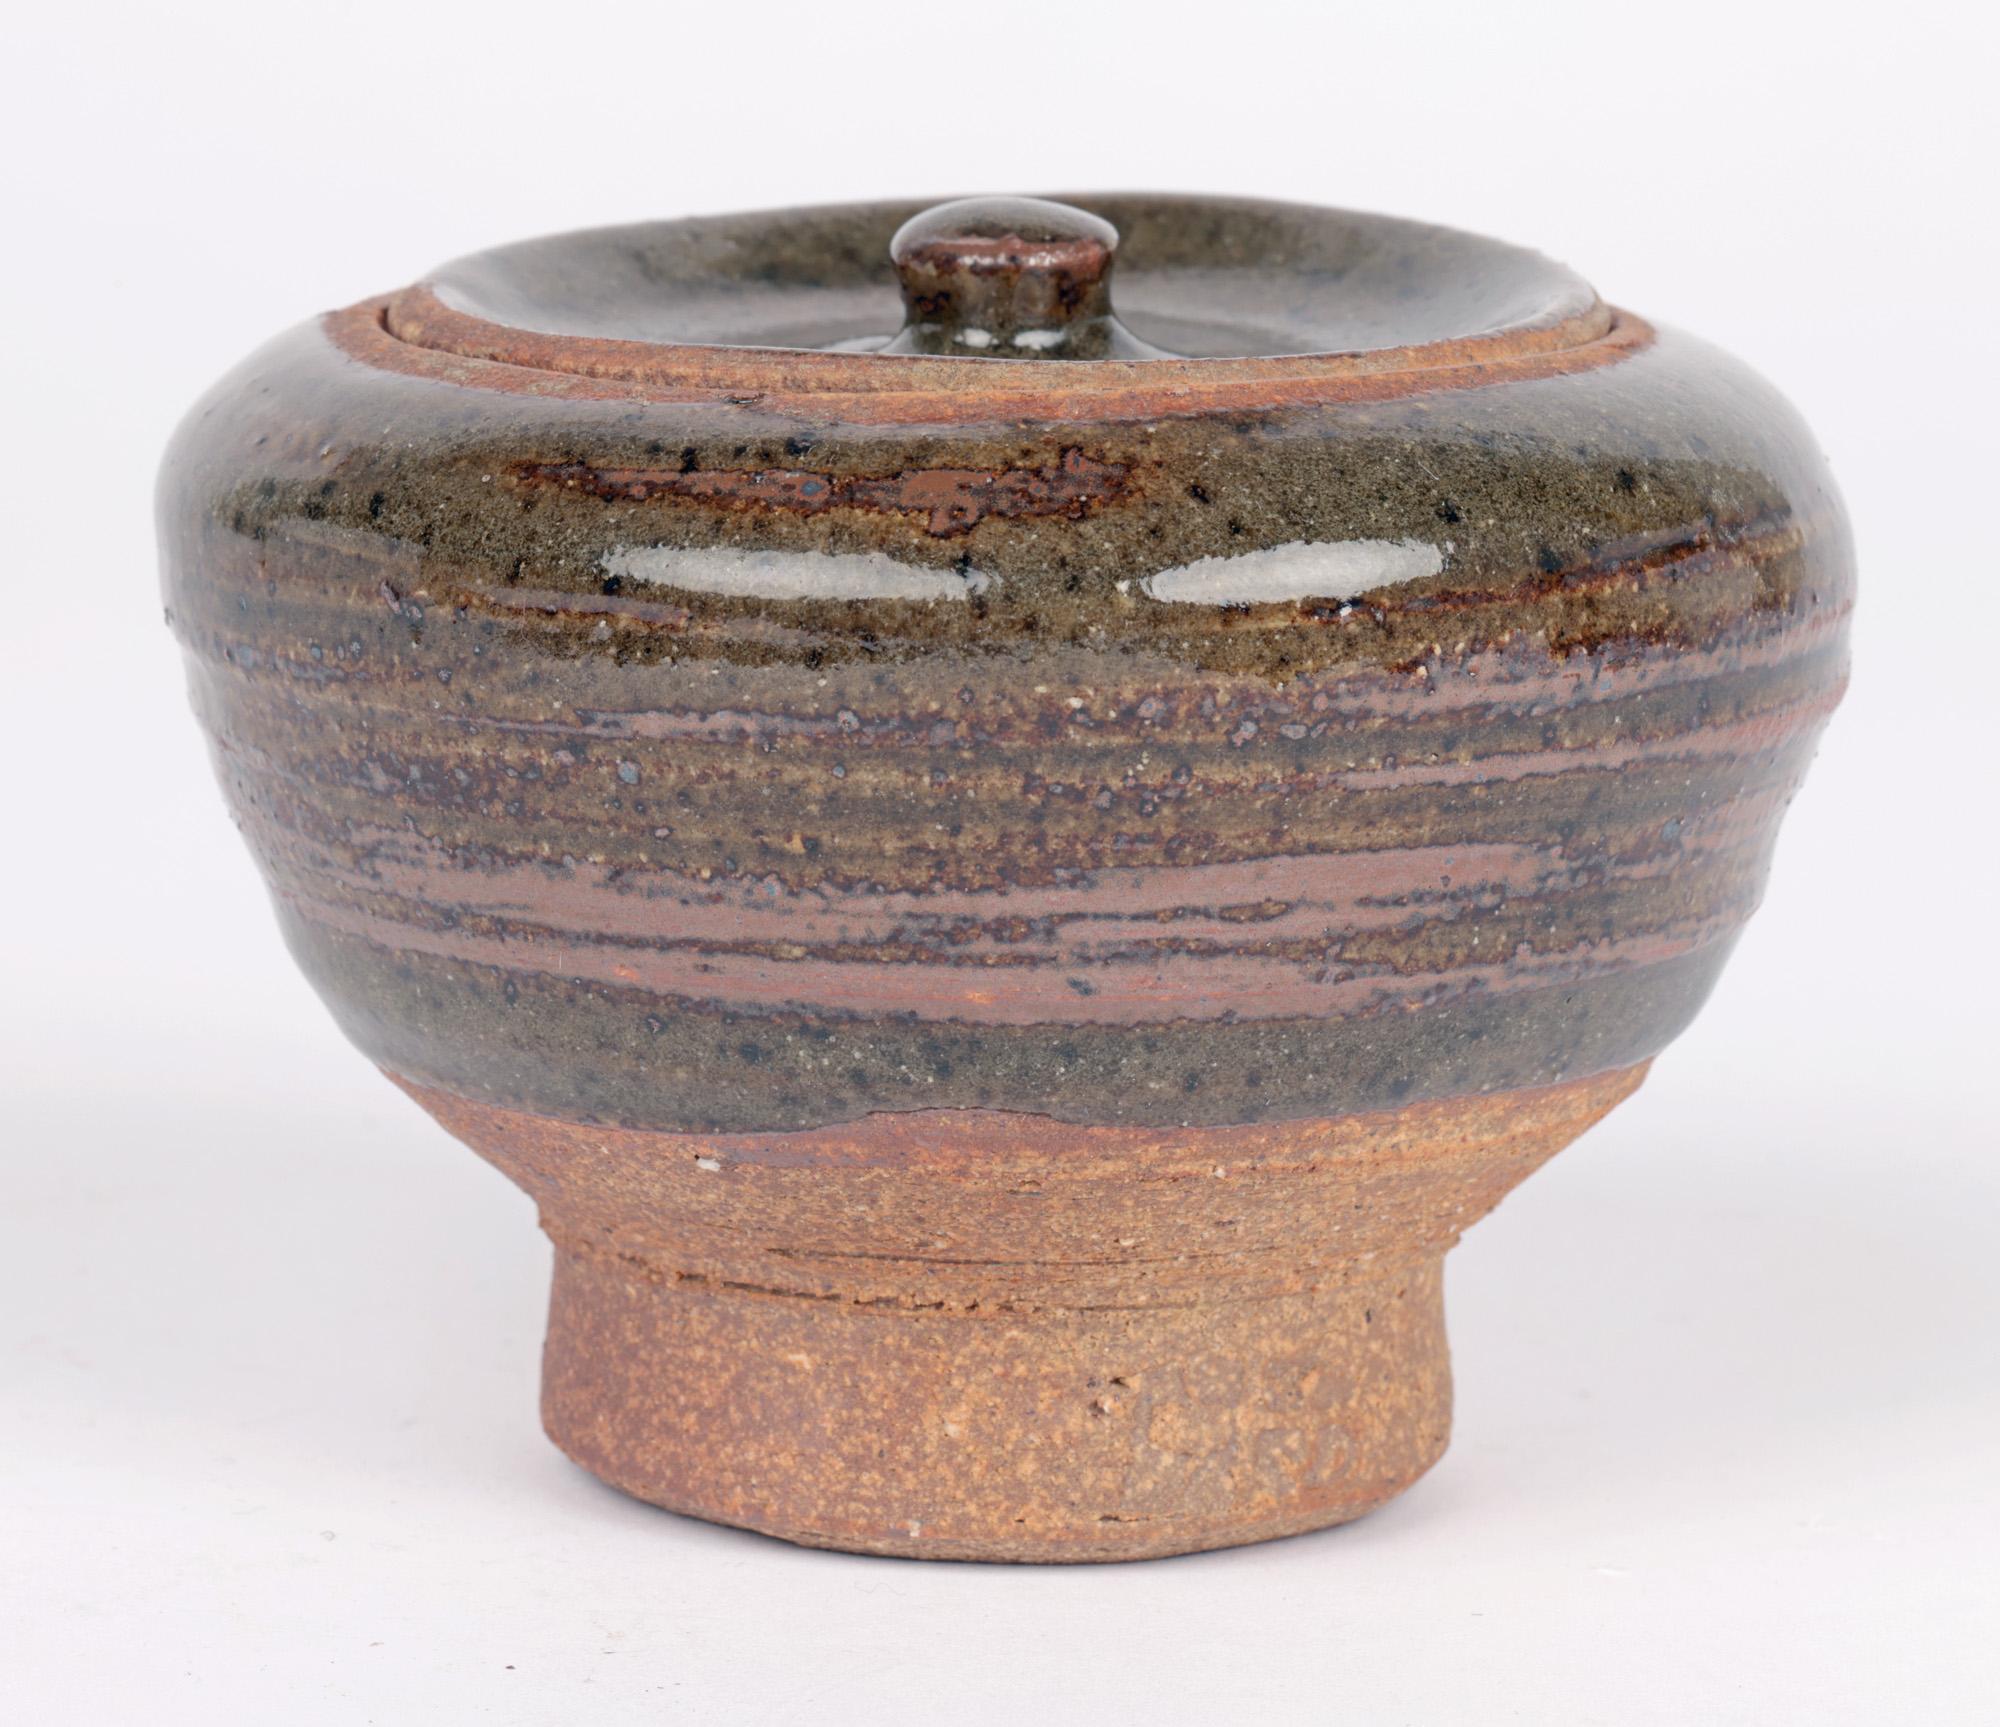 Leach Pottery Studio Pottery Lidded Green Glazed Pot In Good Condition For Sale In Bishop's Stortford, Hertfordshire